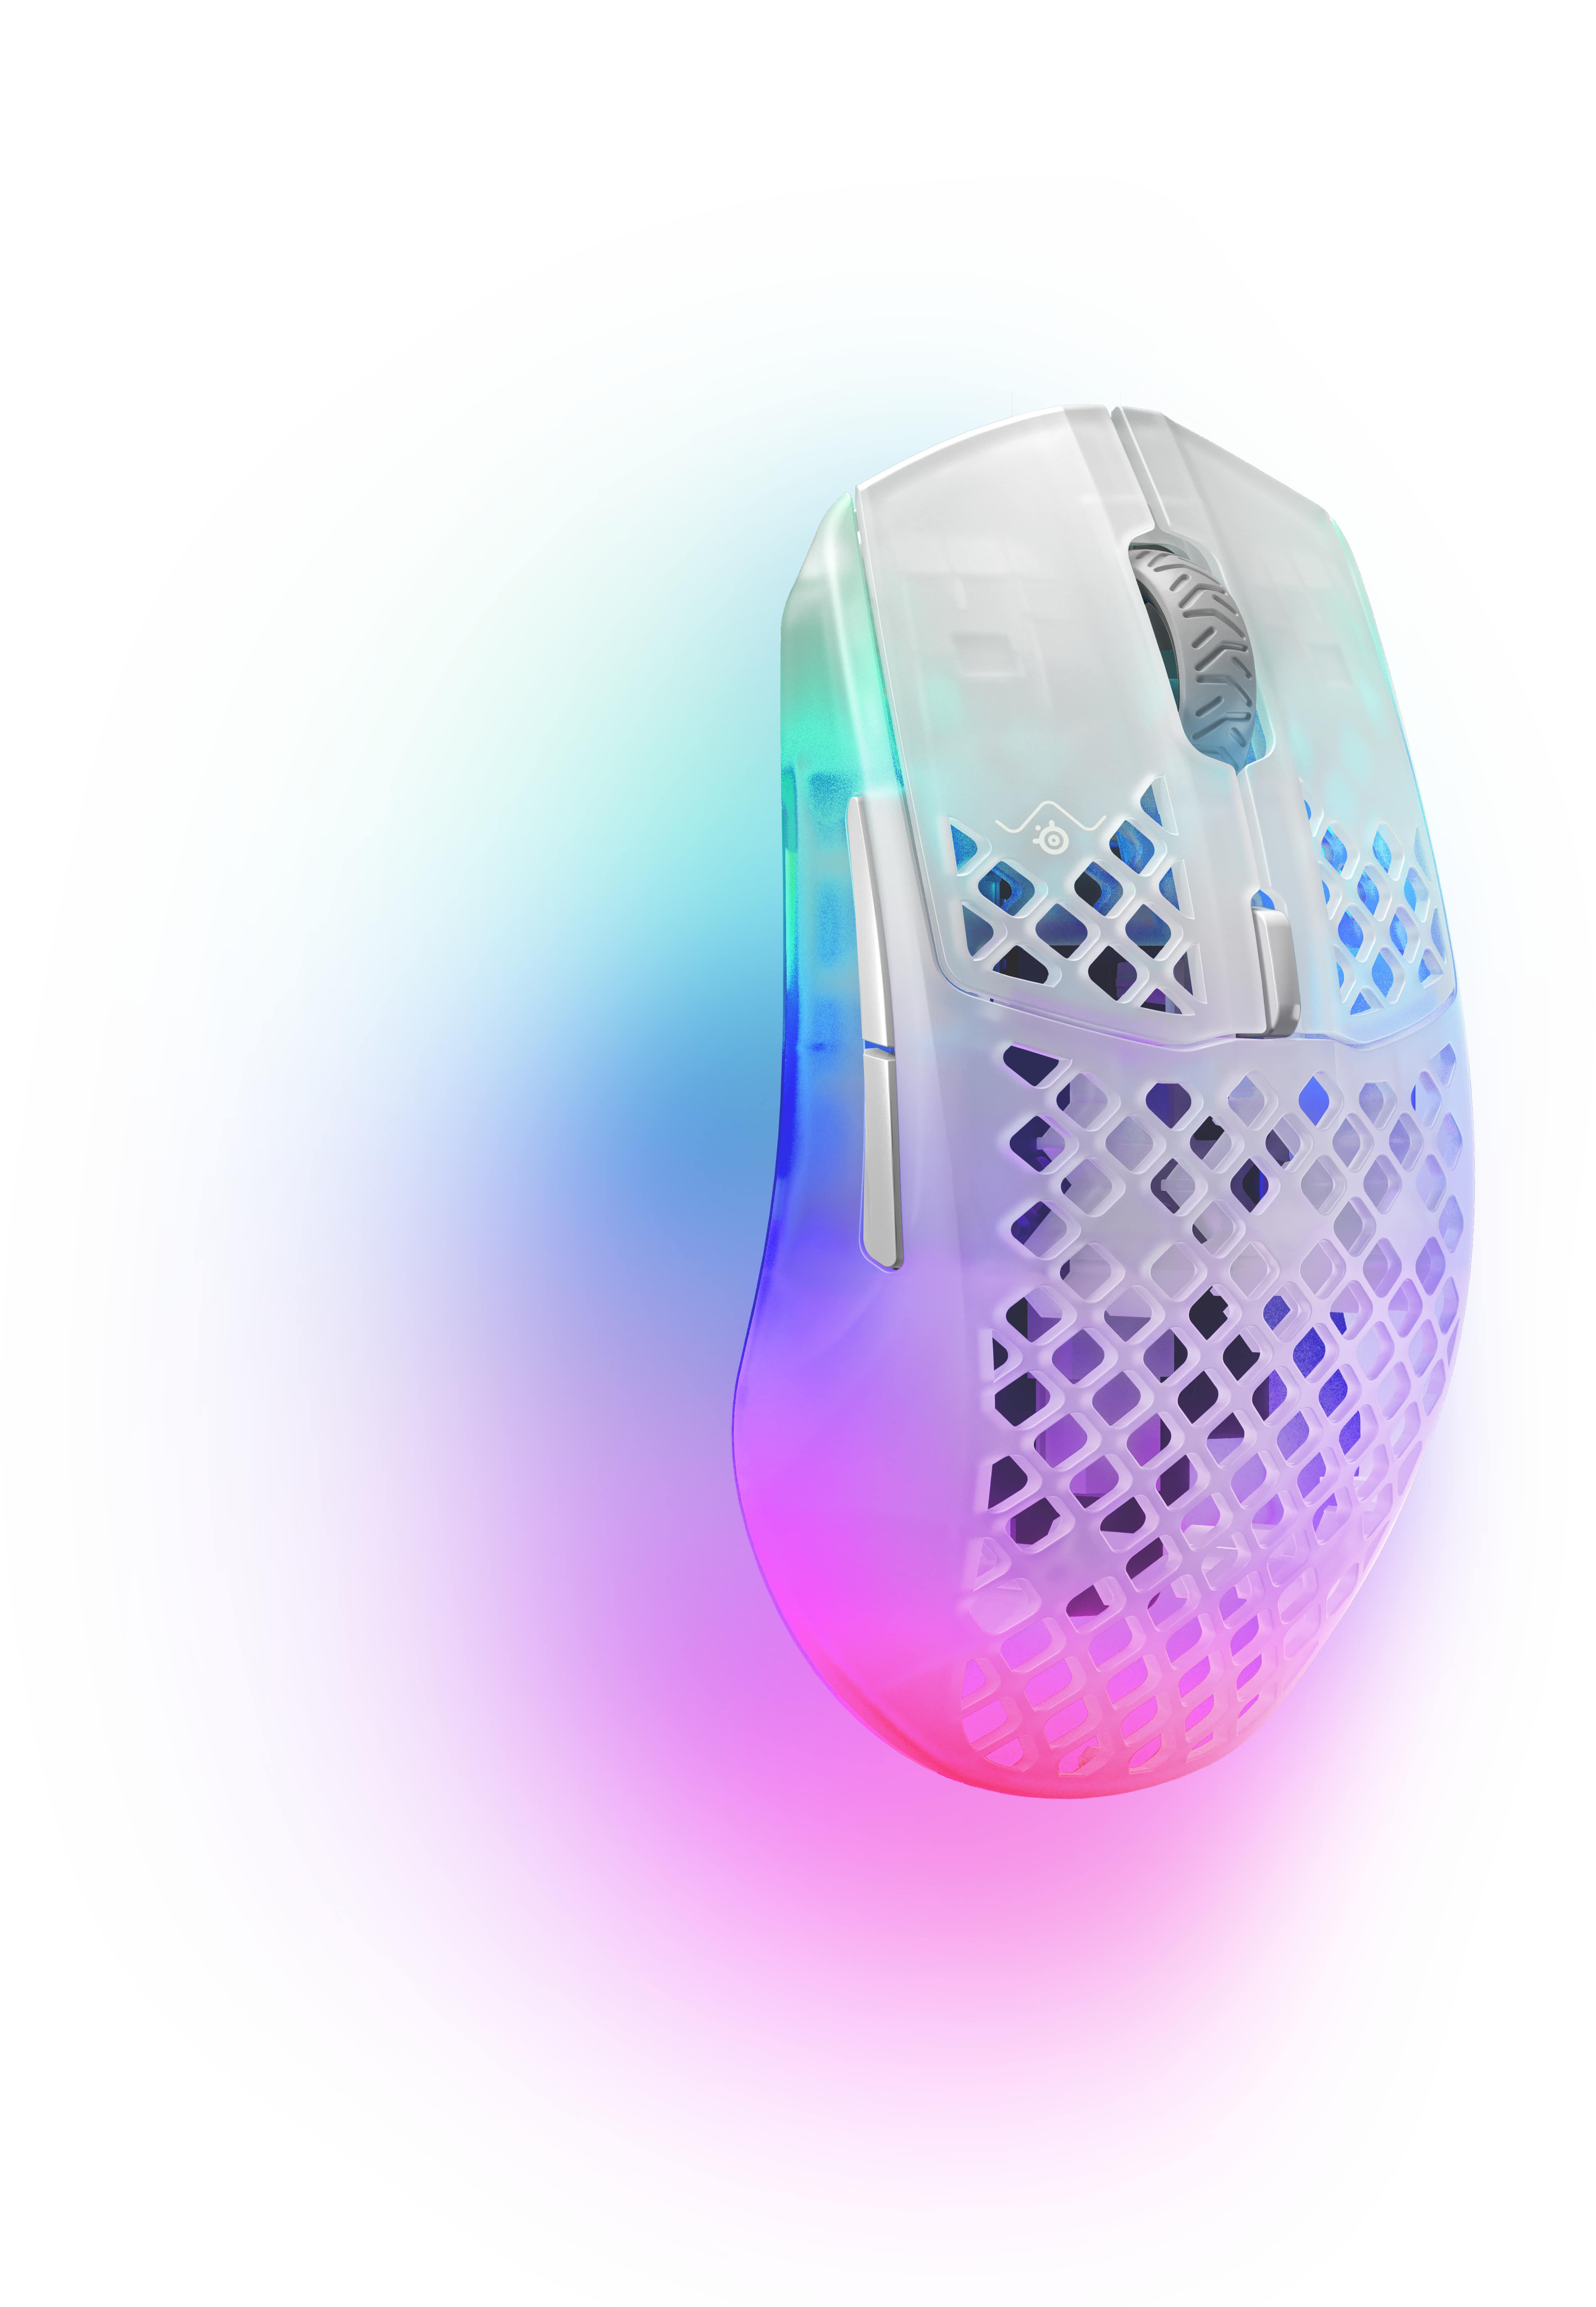 Angle View: SteelSeries - Aerox 3 Ghost Lightweight Wireless Optical Gaming Mouse with Translucent Design - White